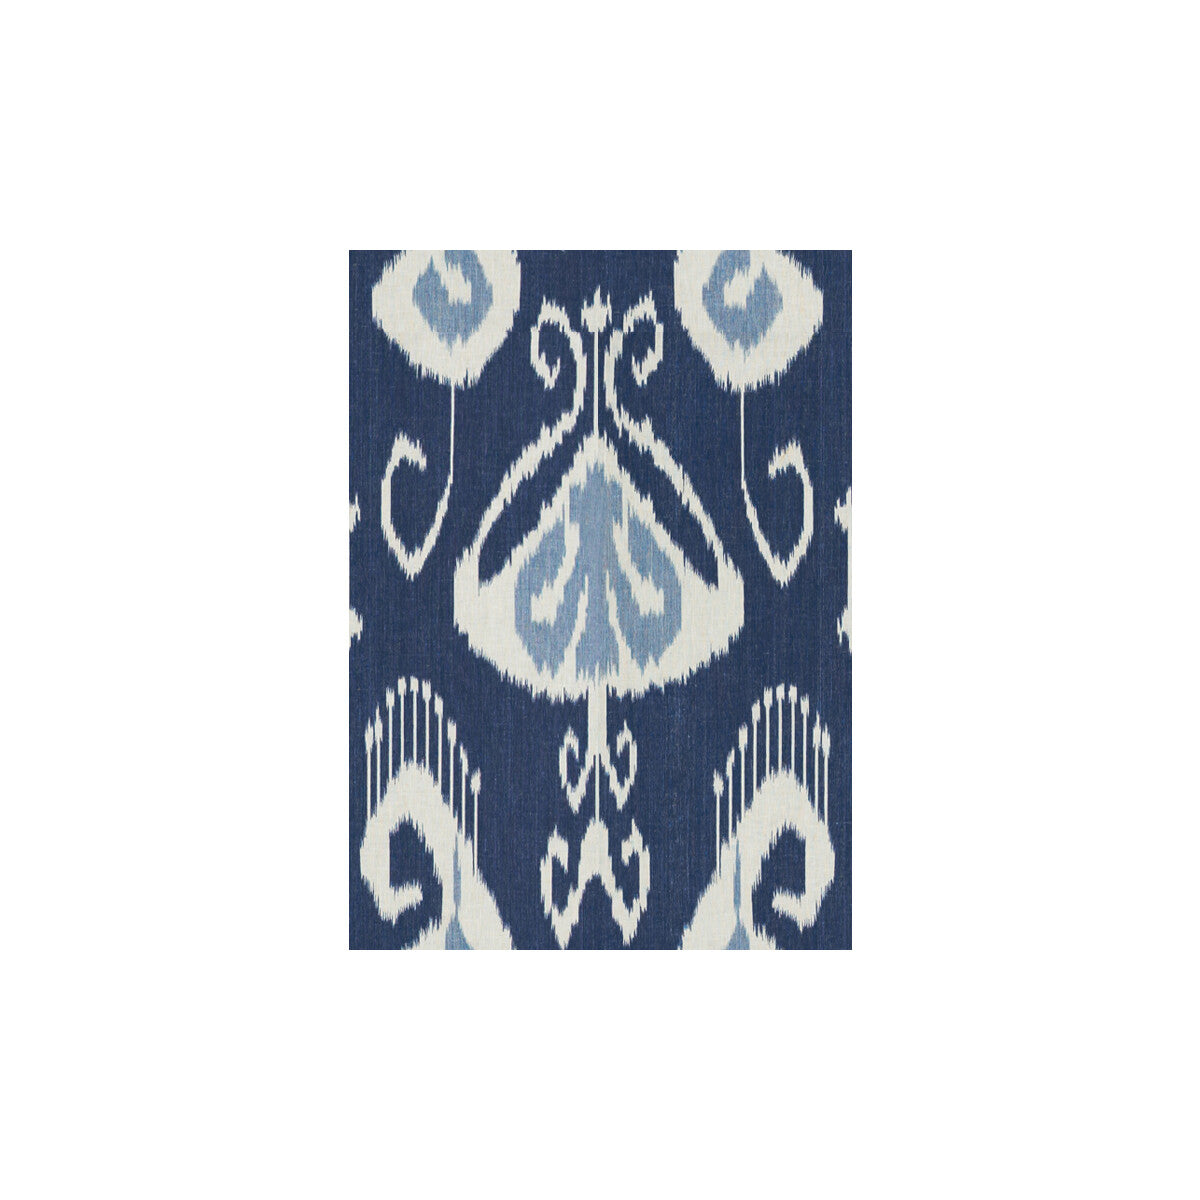 Bansuri fabric in indigo color - pattern PP50319.1.0 - by Baker Lifestyle in the The Echo Design collection